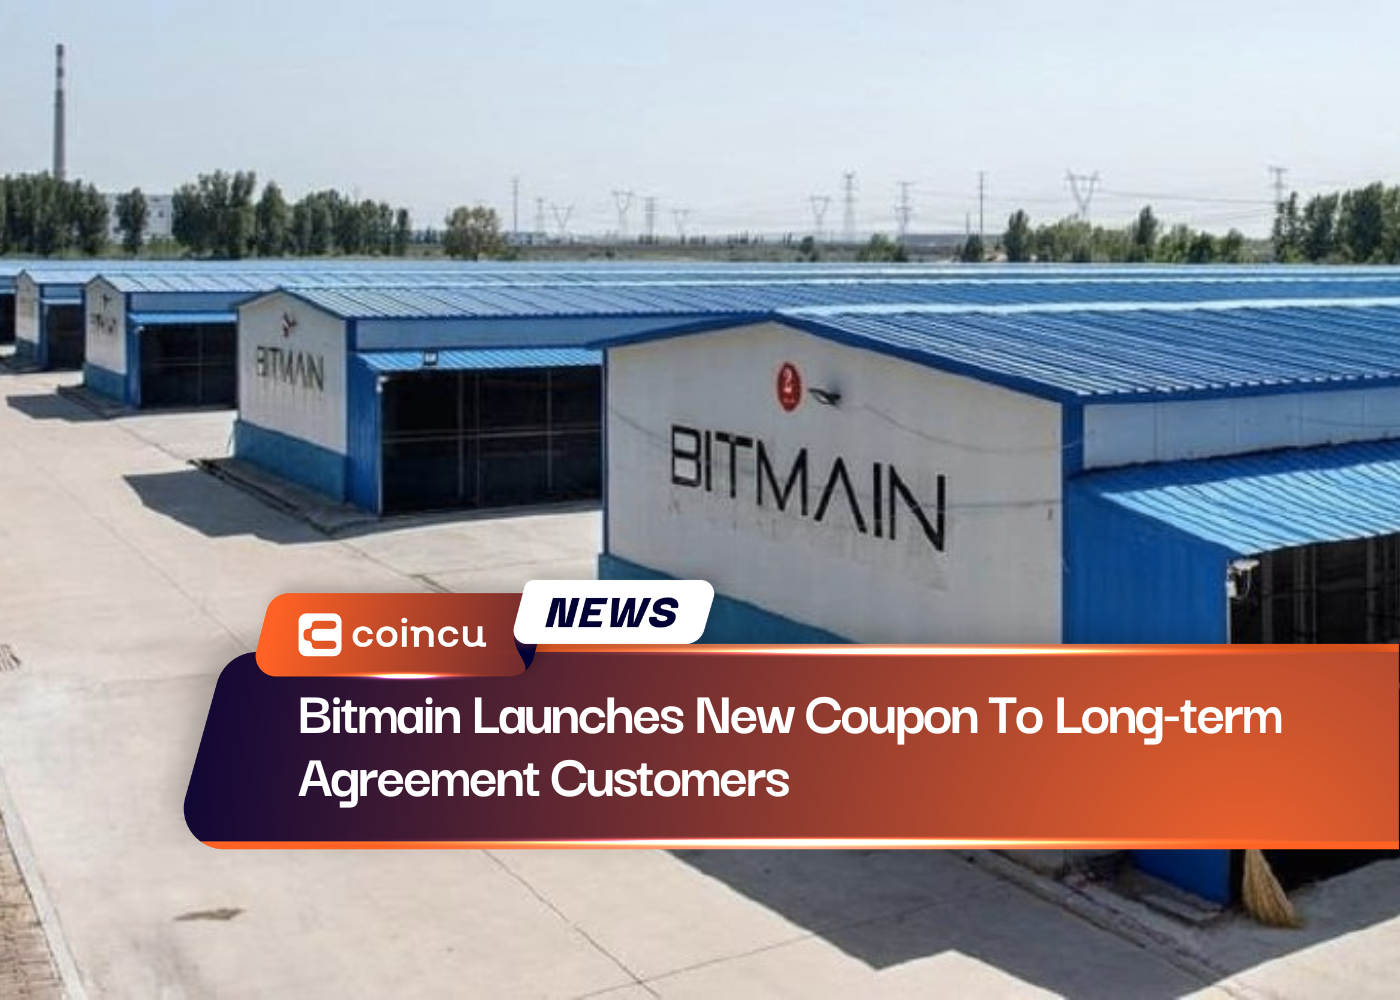 Bitmain Launches New Coupon To Long-term Agreement Customers